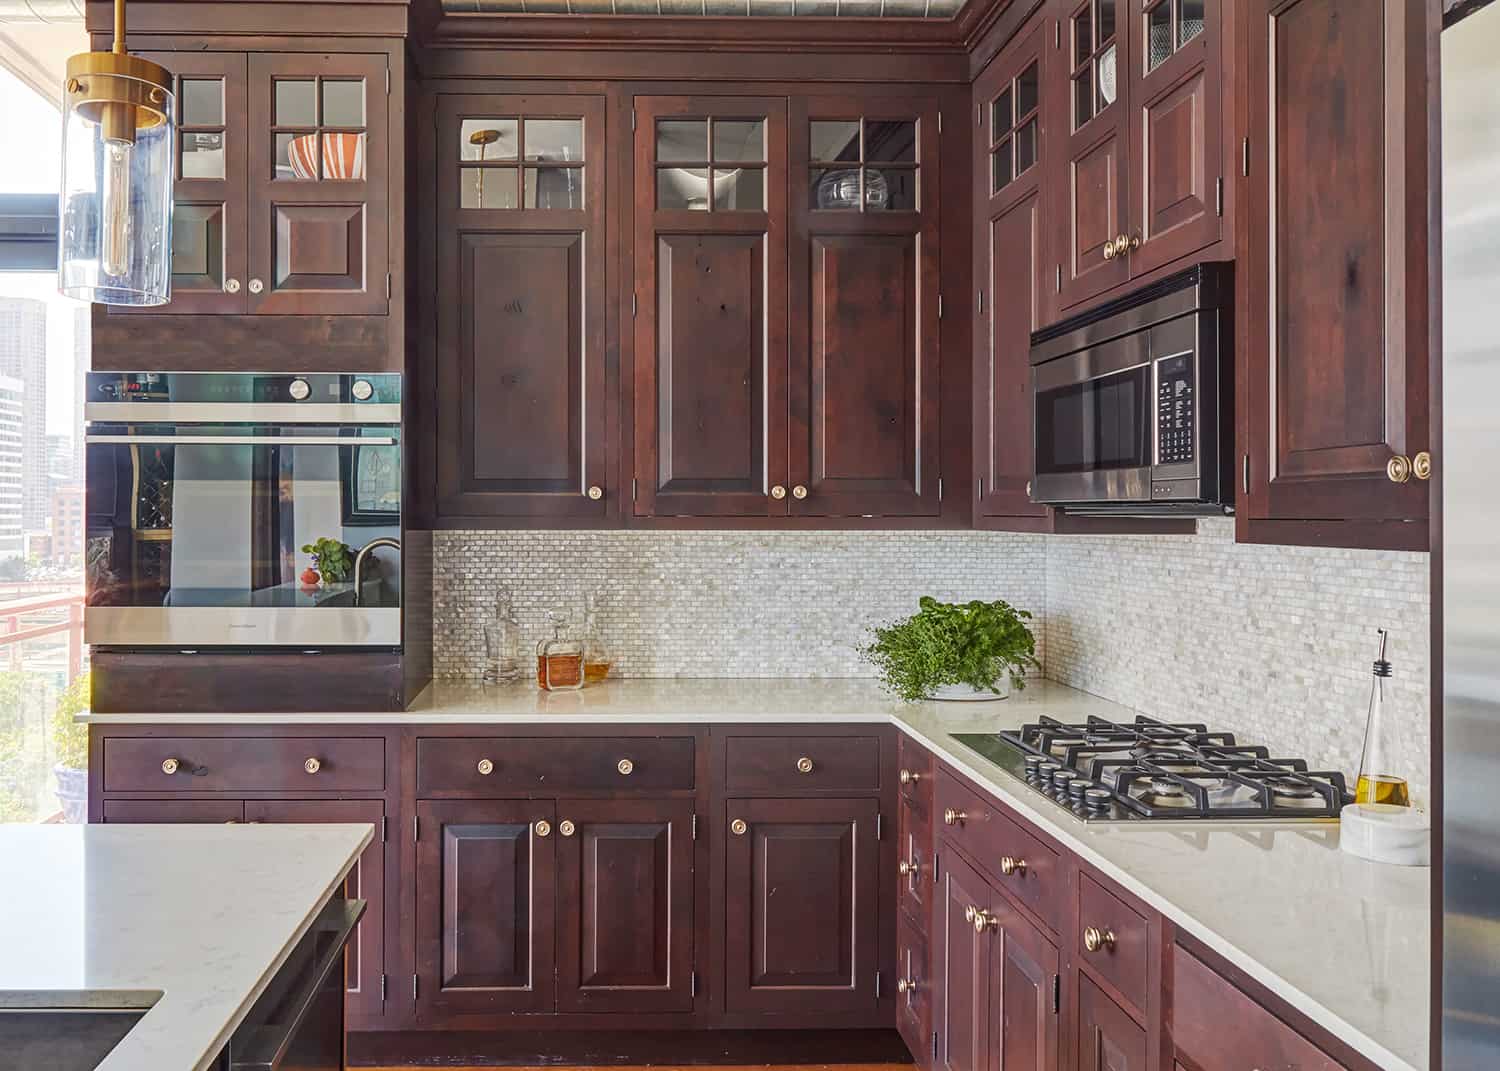 dark reddish brown cabinets with raised fronts